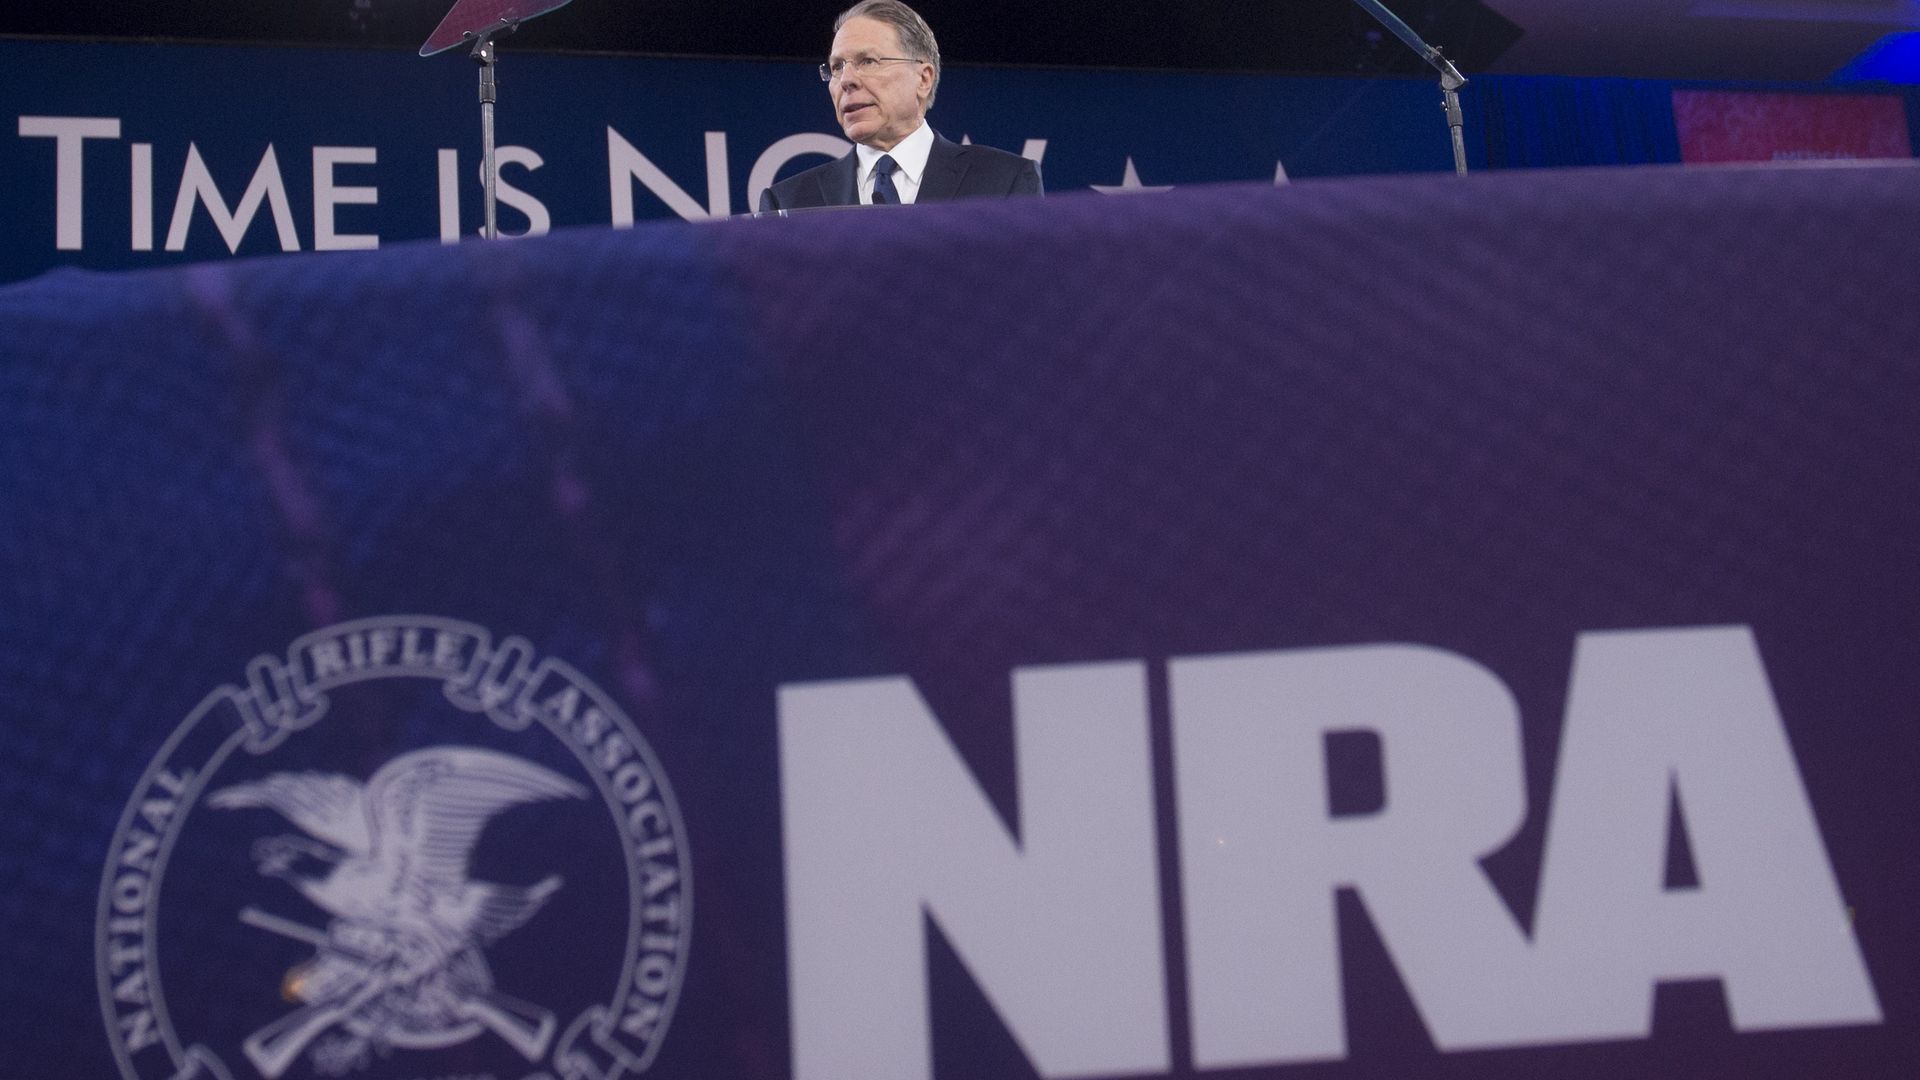 Wayne LaPierre, Executive Vice President of the National Rifle Association (NRA), speaks during the annual